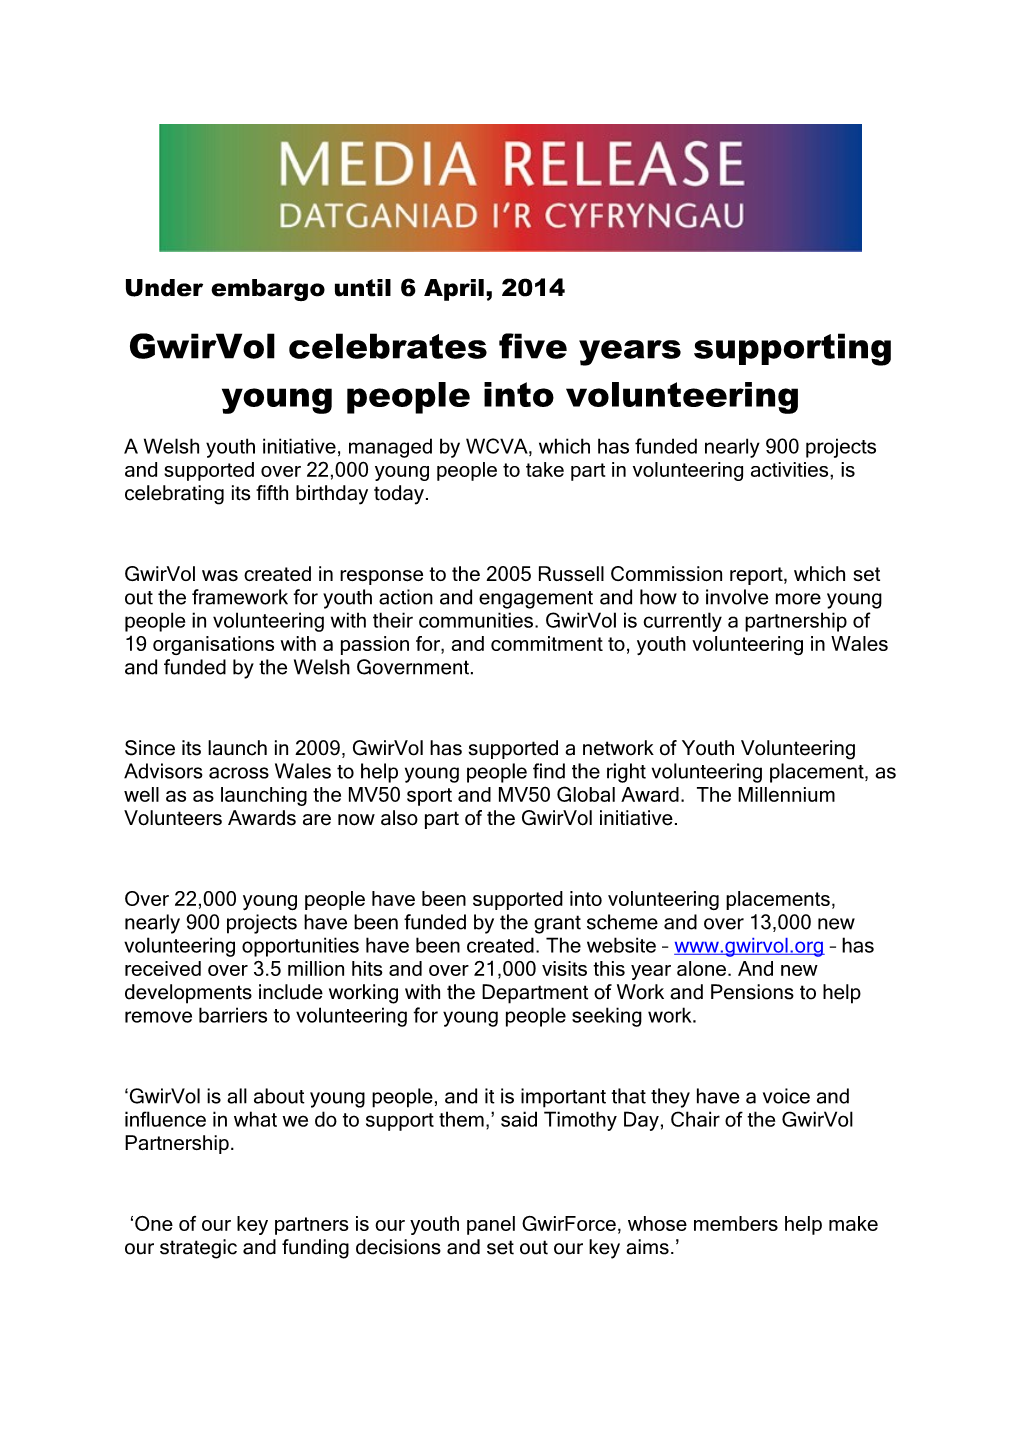 Gwirvol Celebrates Five Years Supporting Young People Into Volunteering